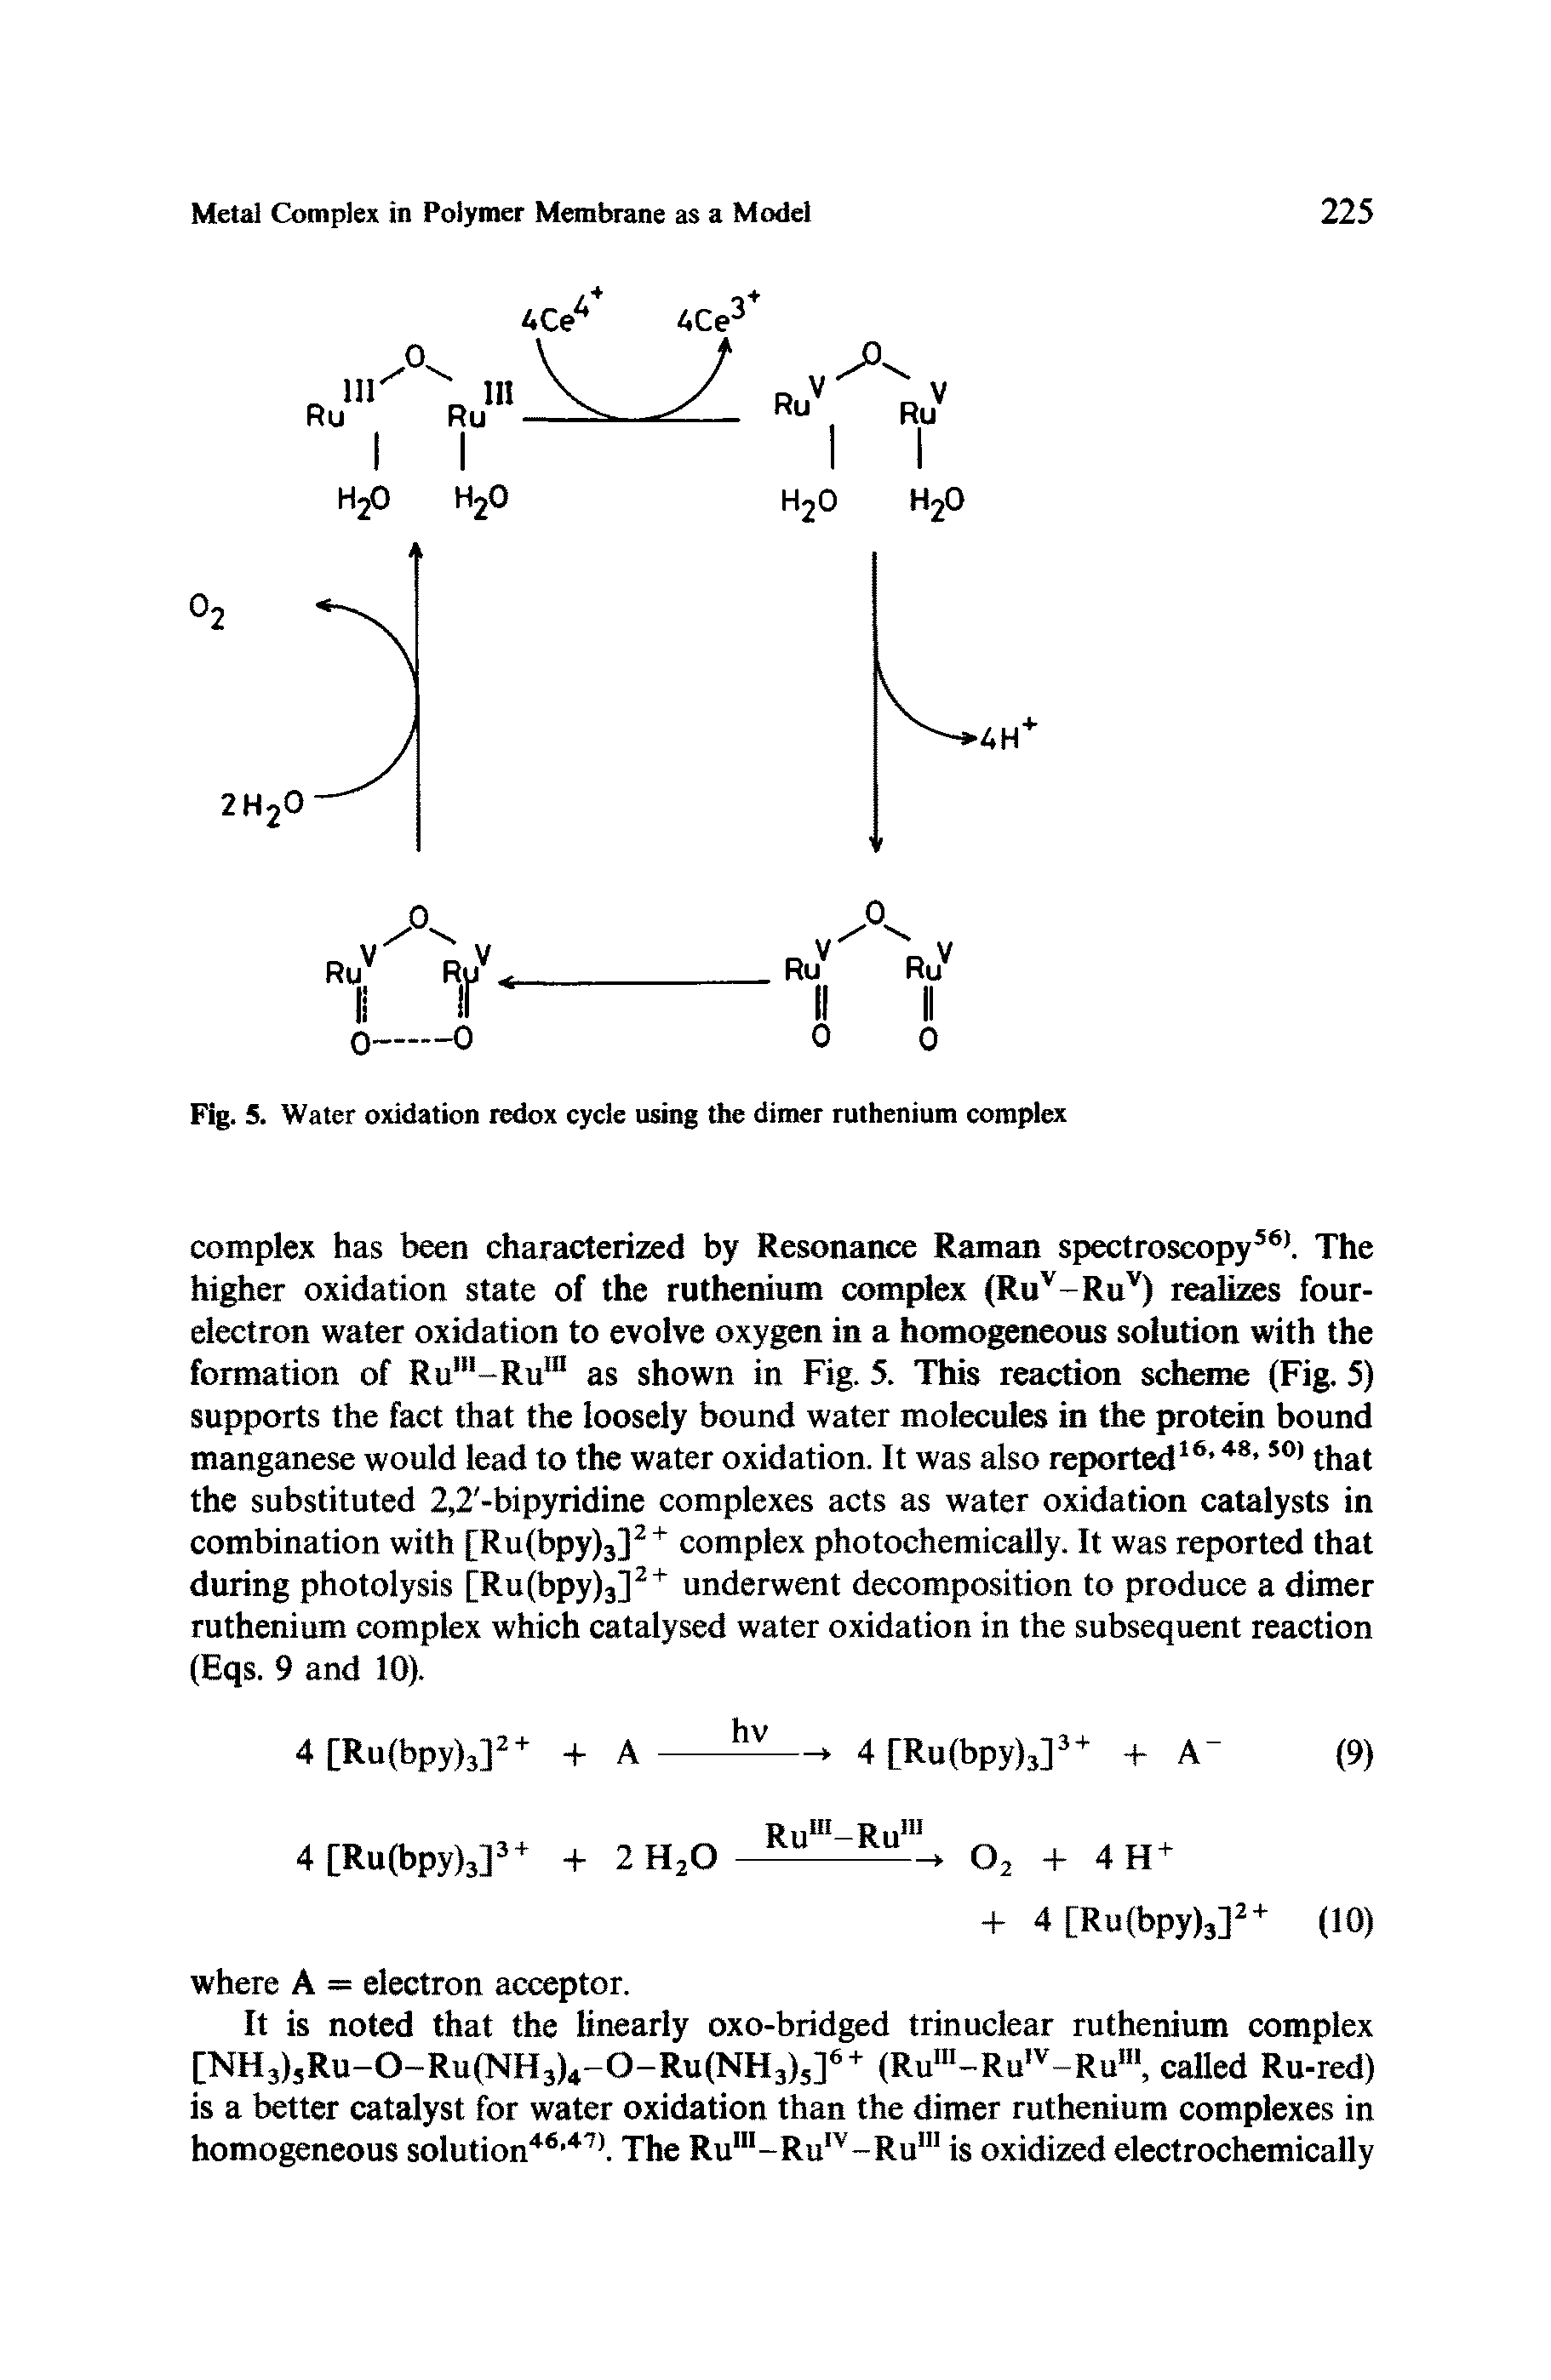 Fig. 5. Water oxidation redox cycle using the dimer ruthenium complex...